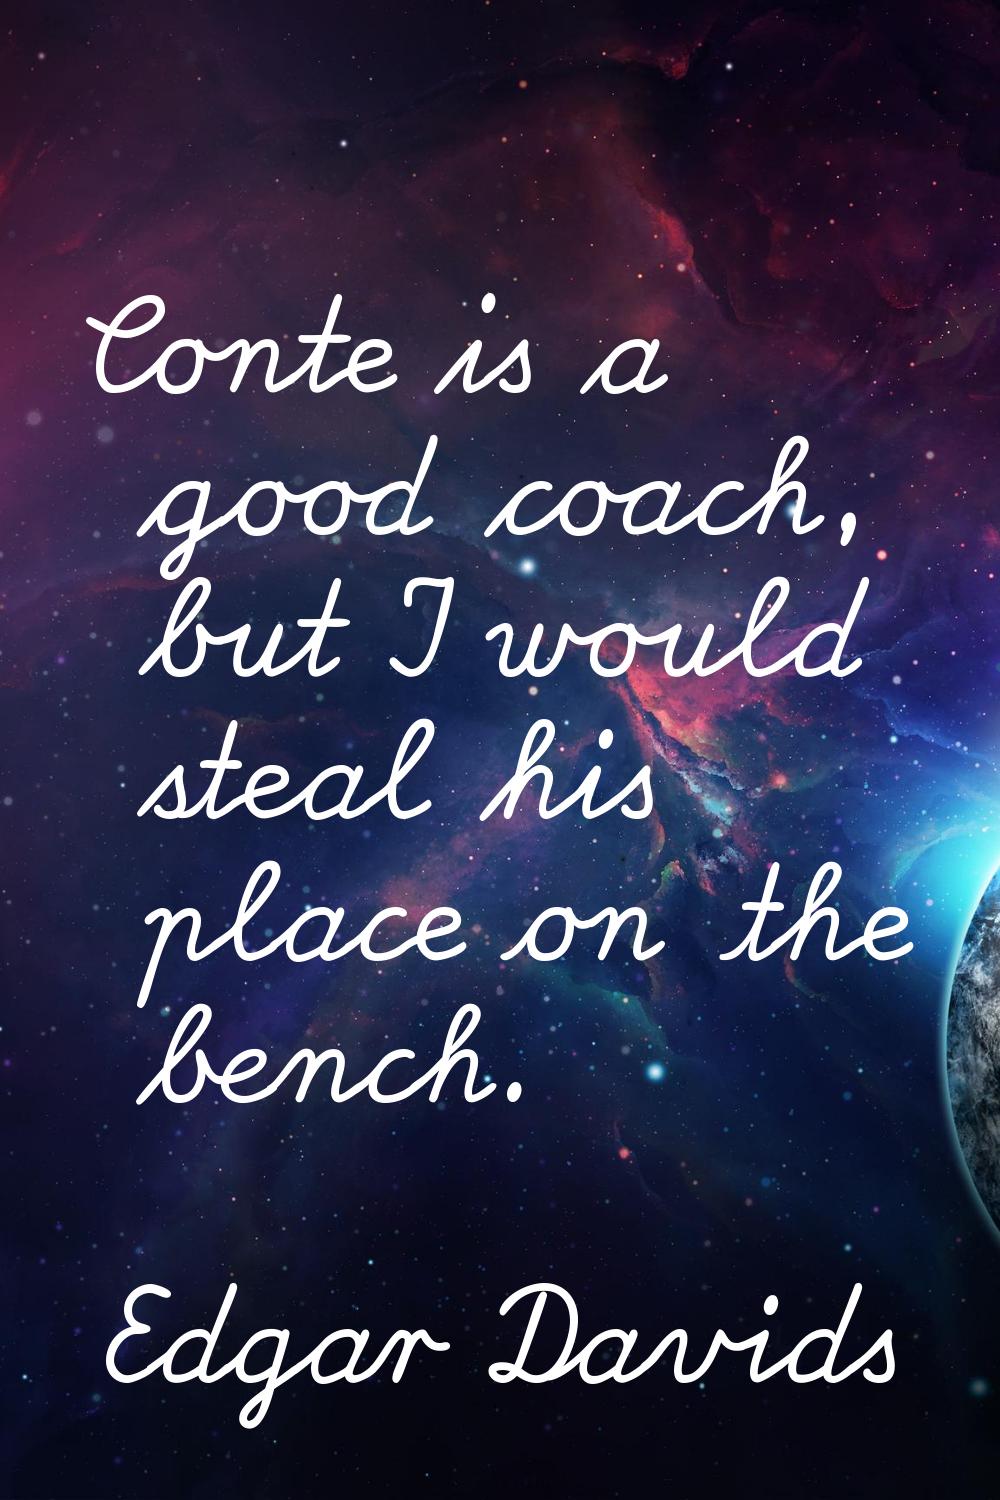 Conte is a good coach, but I would steal his place on the bench.